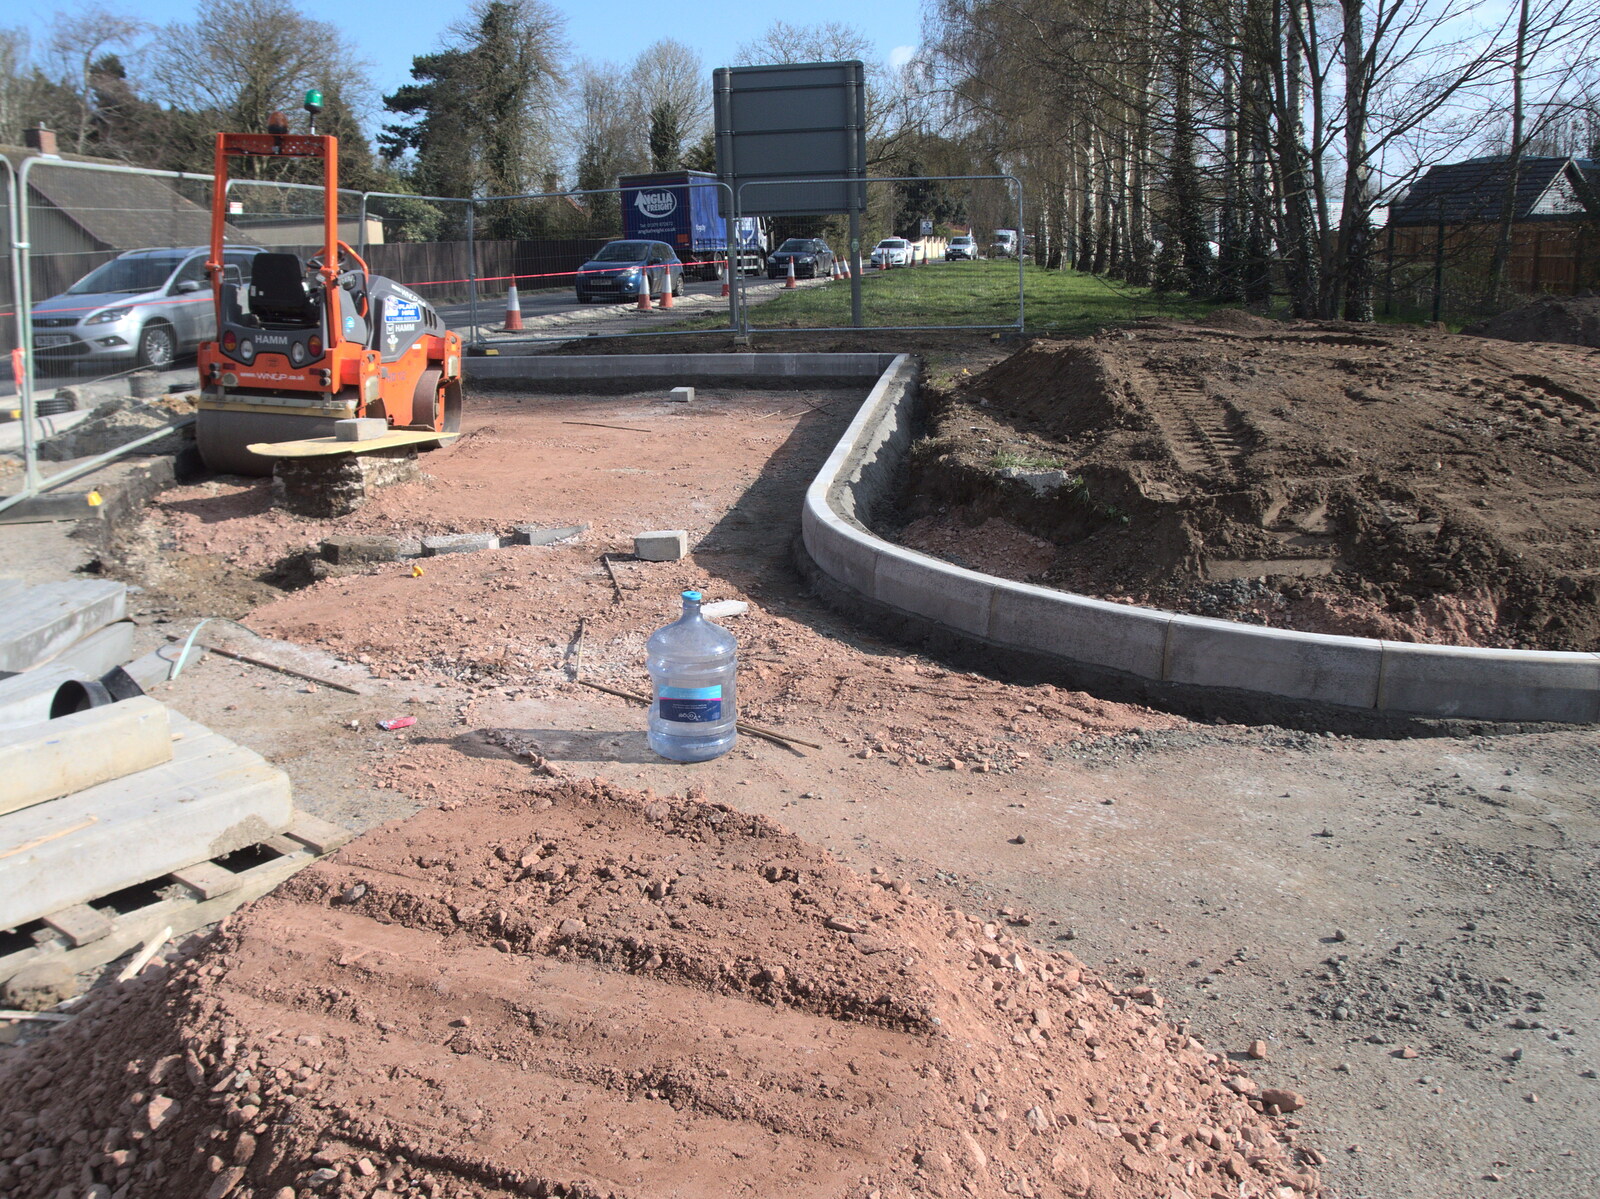 A new layout for the old road by the A140 from Roadworks and Harry's Trampoline, Brome, Suffolk - 6th April 2021